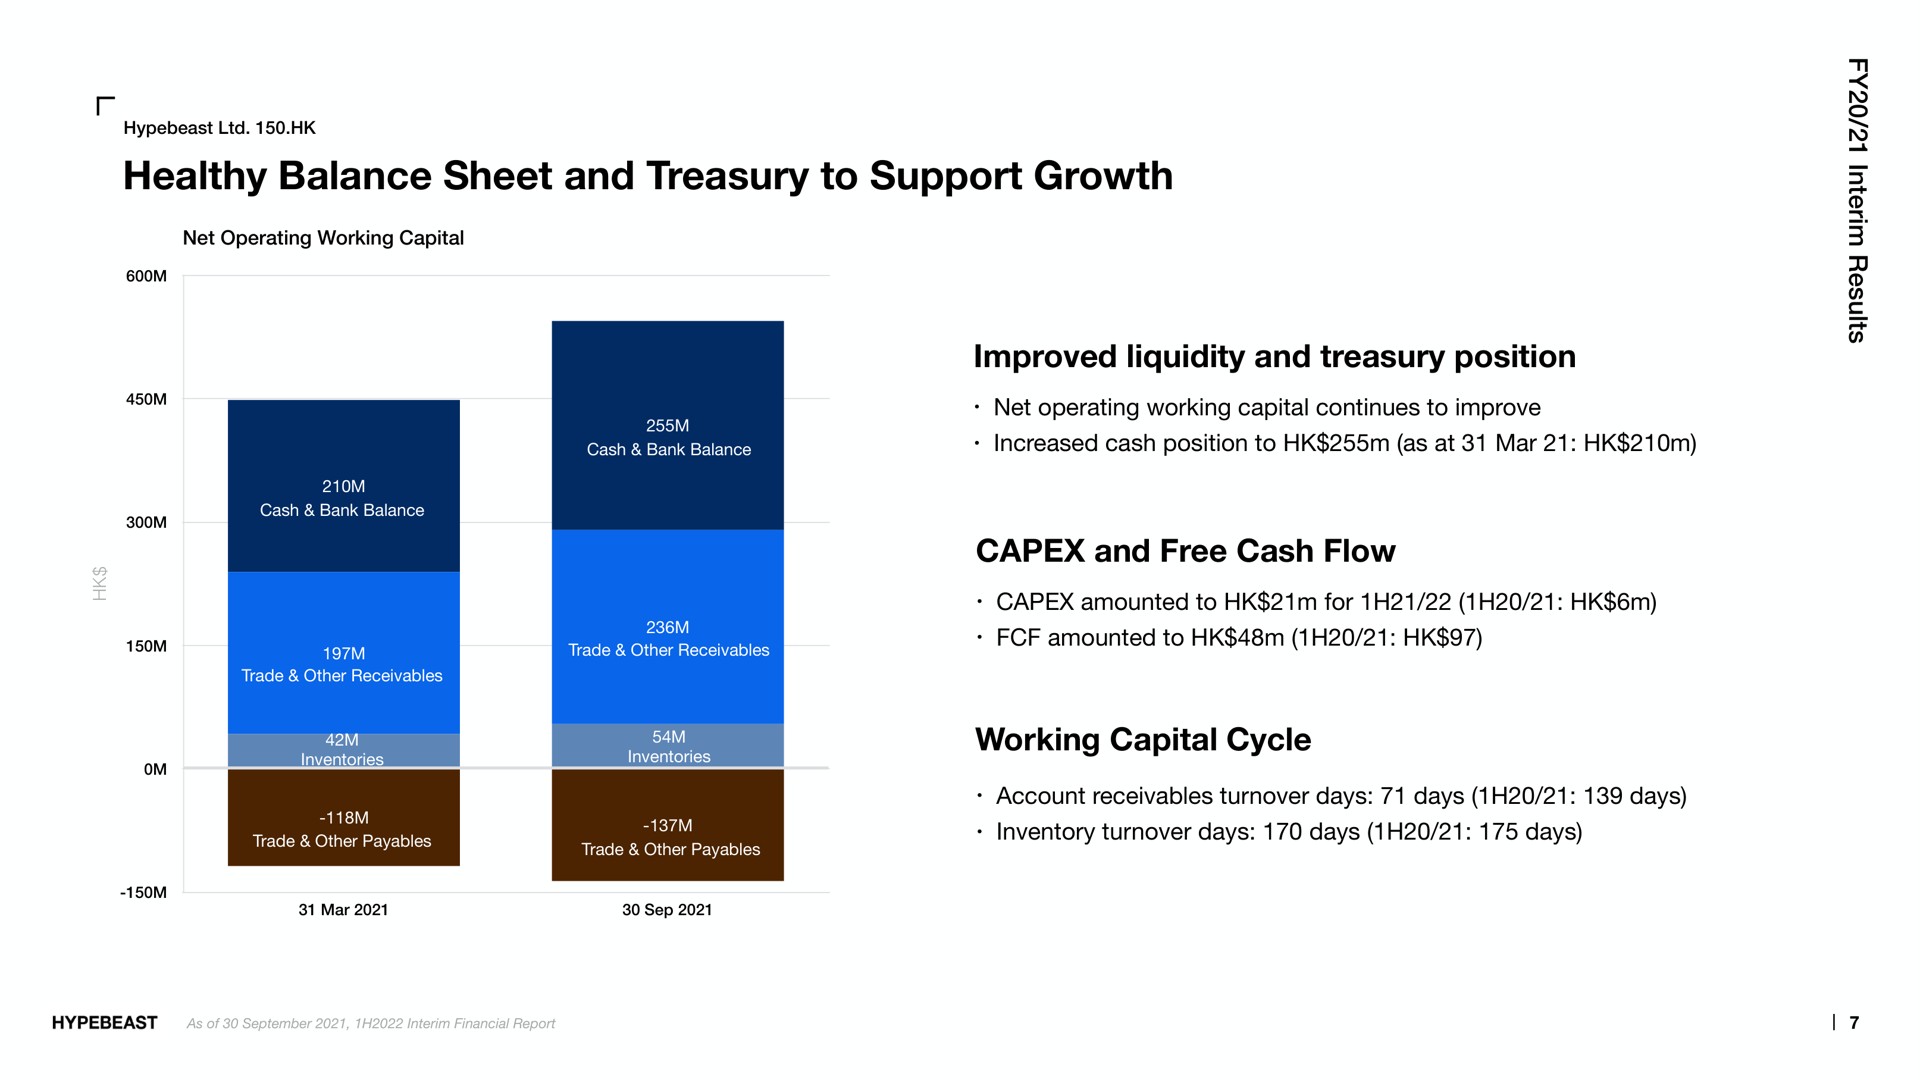 healthy balance sheet and treasury to support growth improved liquidity and treasury position and free cash flow working capital cycle | Hypebeast